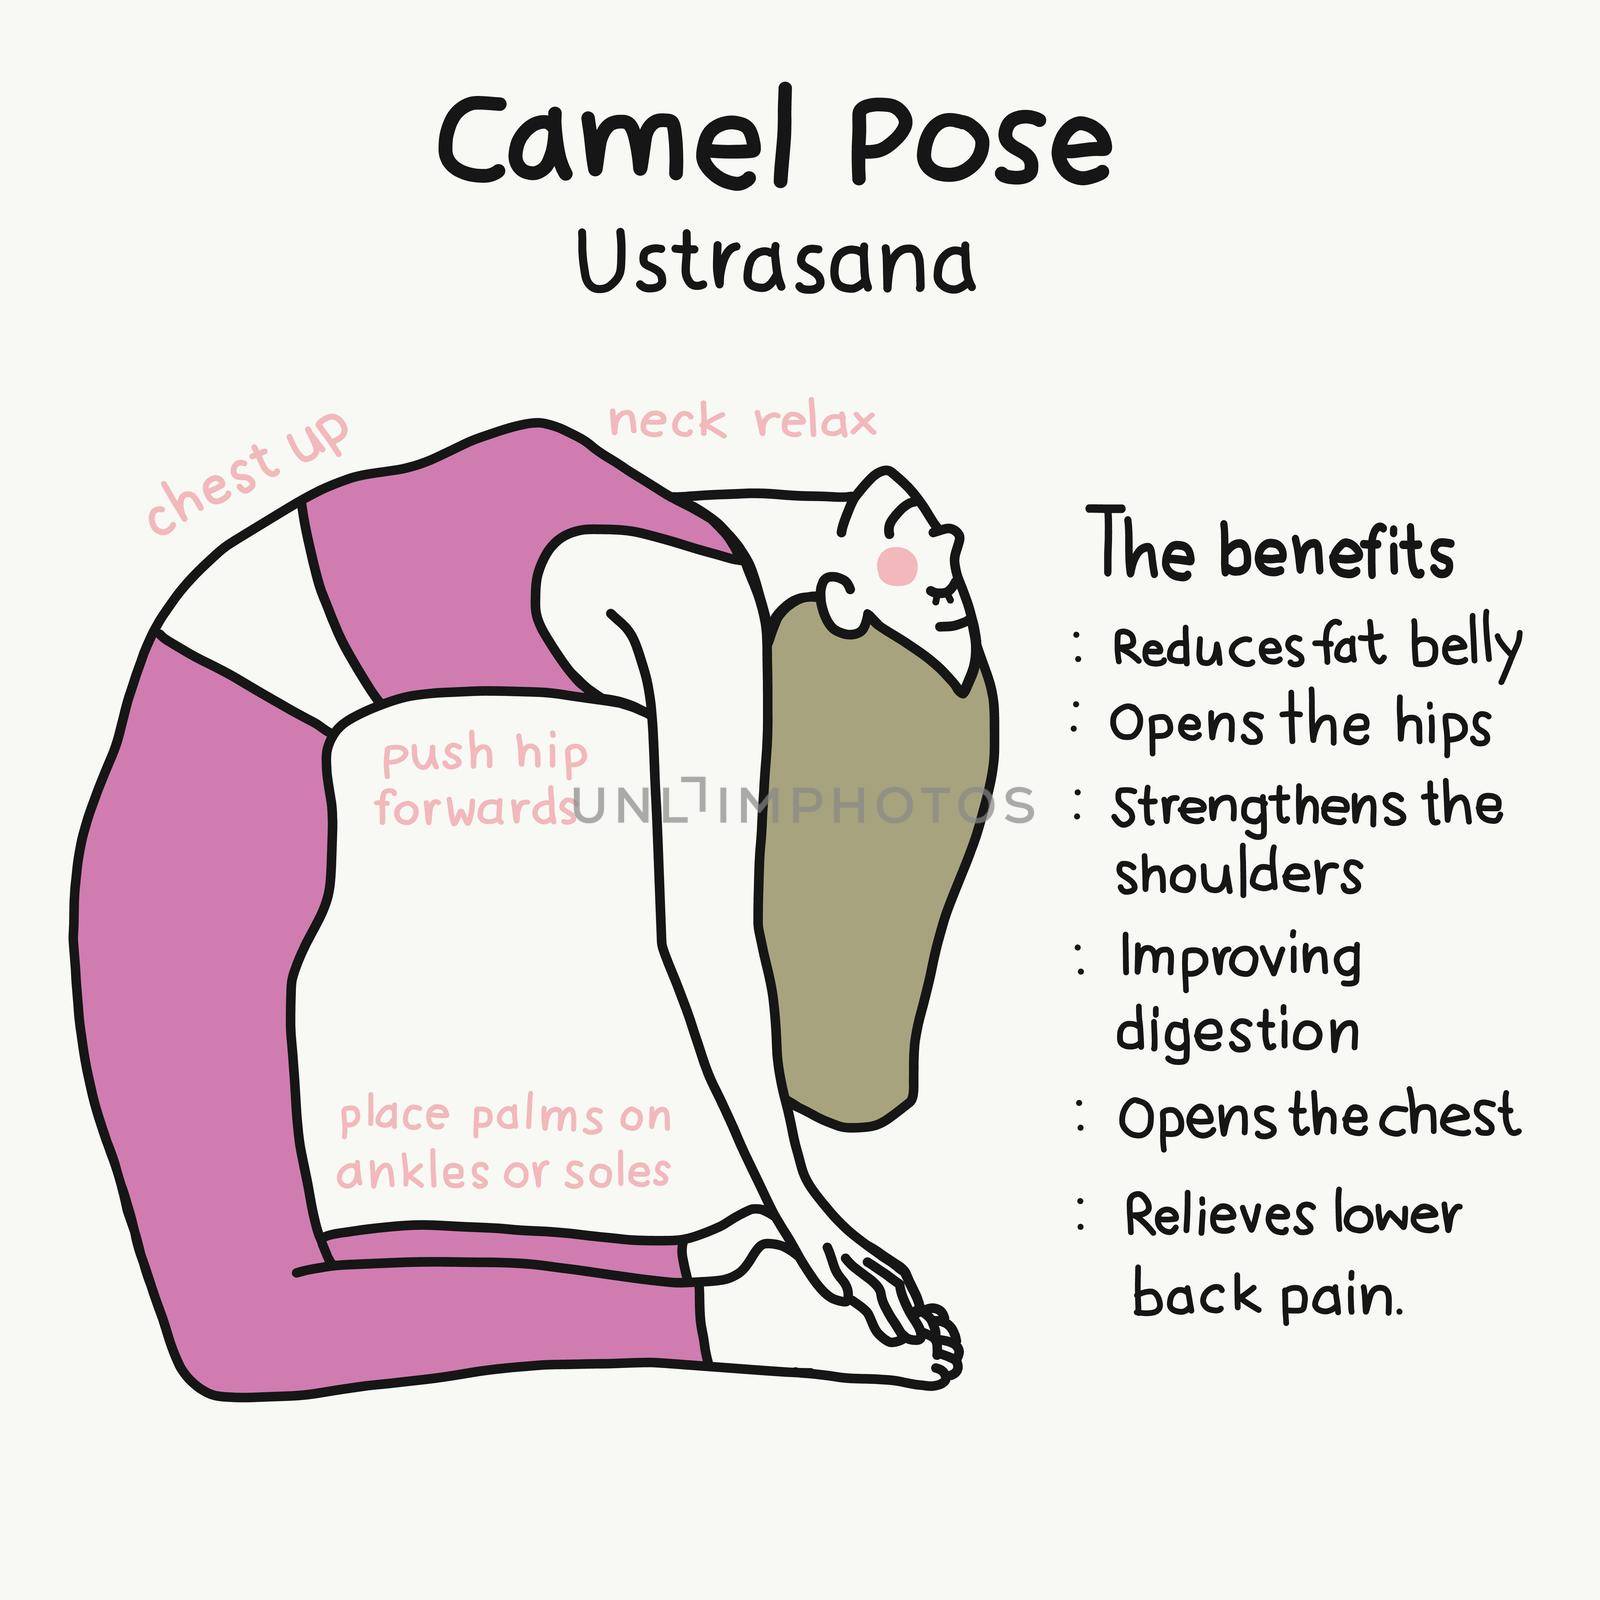 Camel yoga pose and benefits cartoon vector illustration by Yoopho